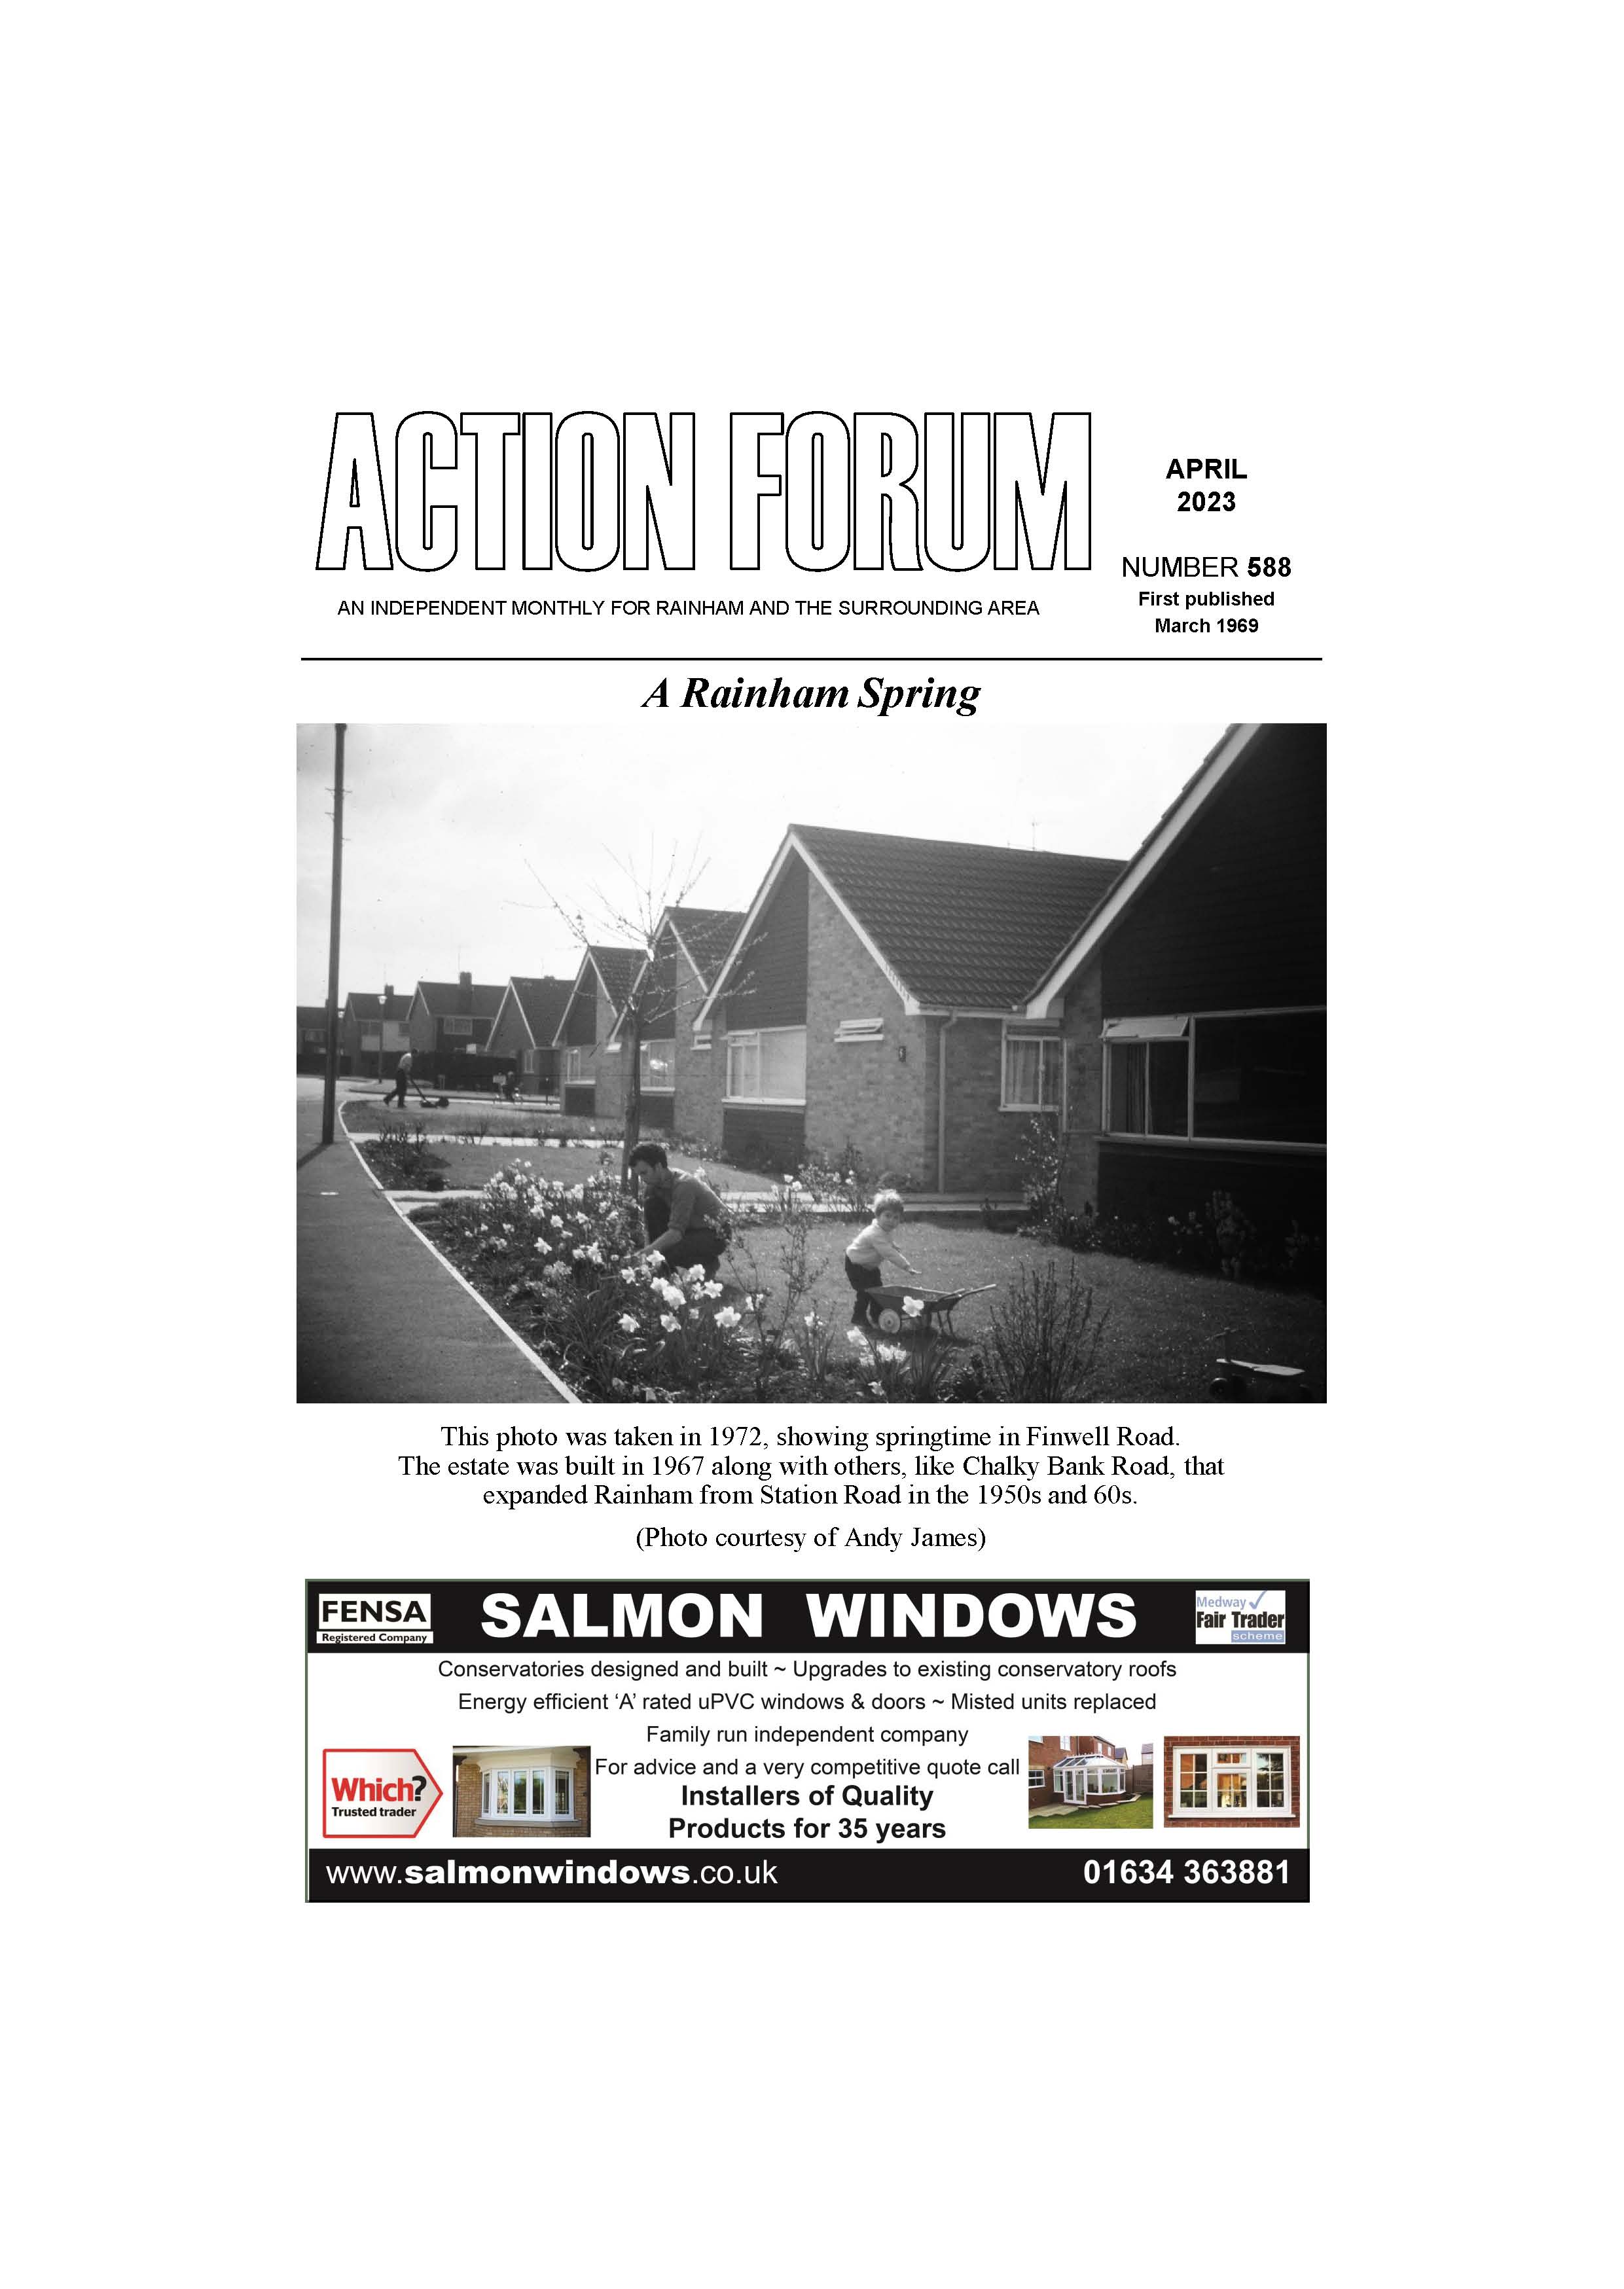 Action Forum magazine number 588 , Cover picture is of Spring in Finwell Road in 1972